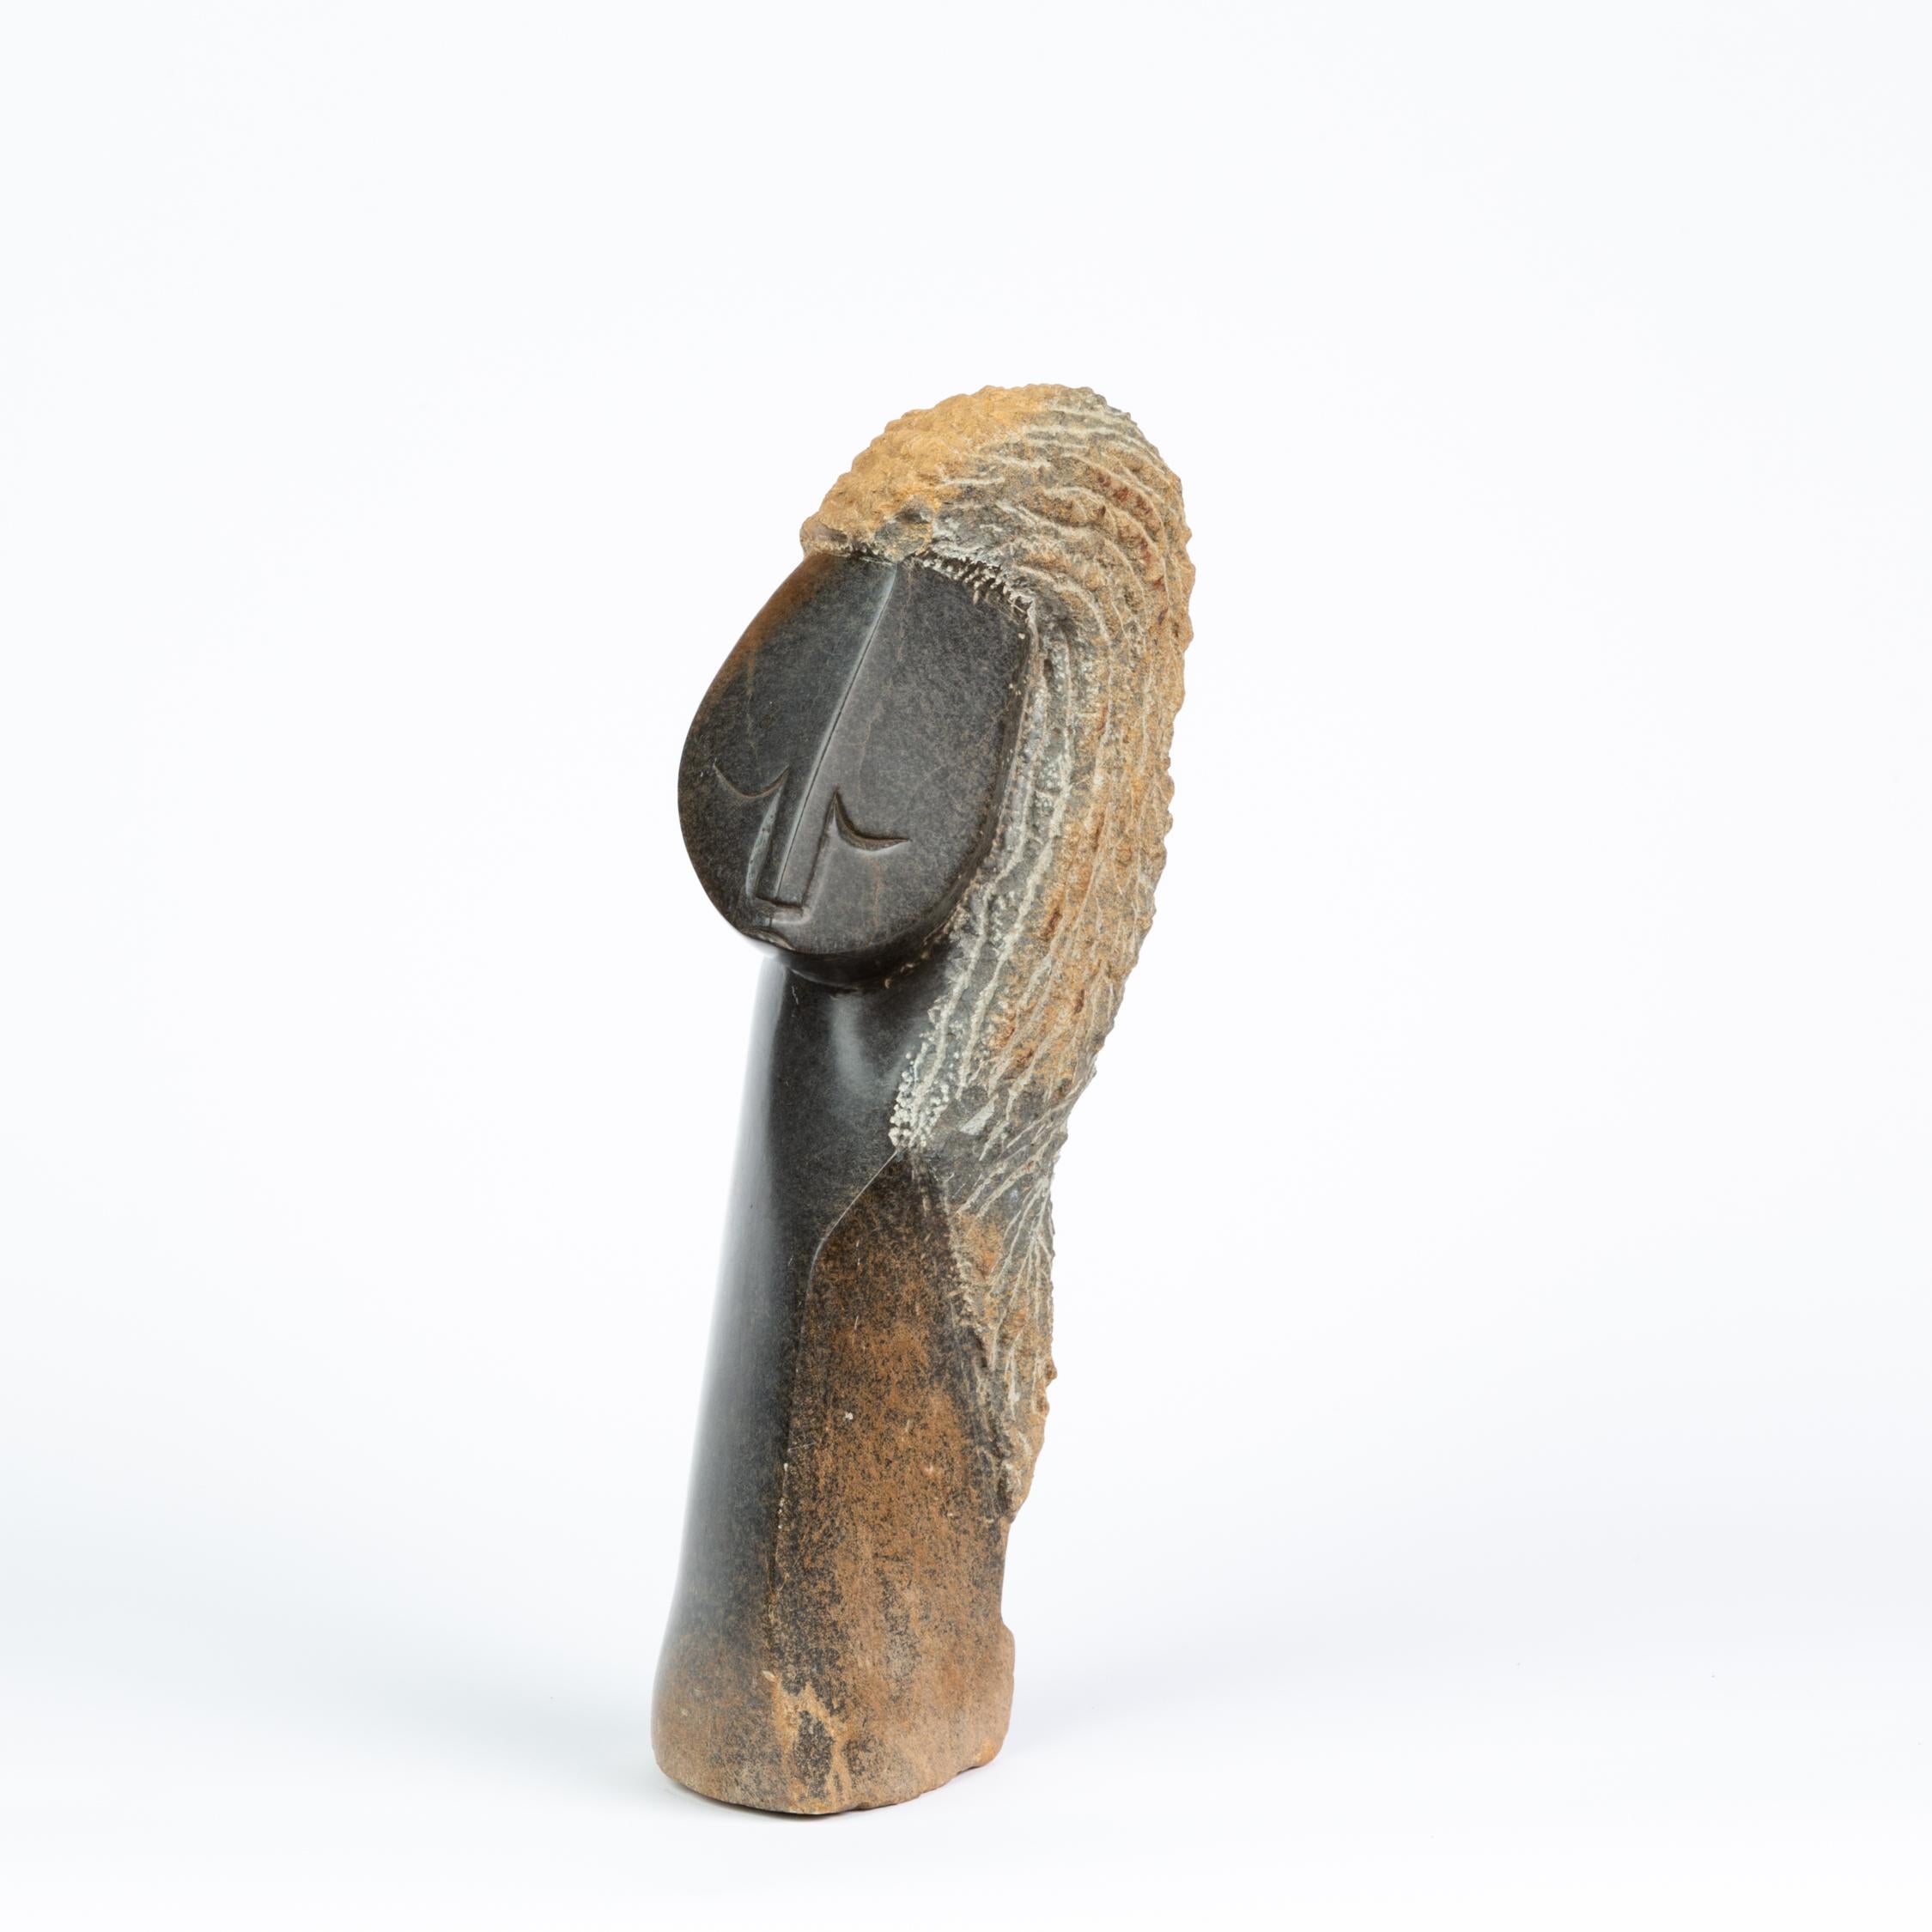 A hand carved sculpture of a human figure in the Shona style of Zimbabwe. The sculpture, carved from black springstone, uses areas of high polish to reveal an angular head and peaceful visage with closed eyes, while working with the natural texture